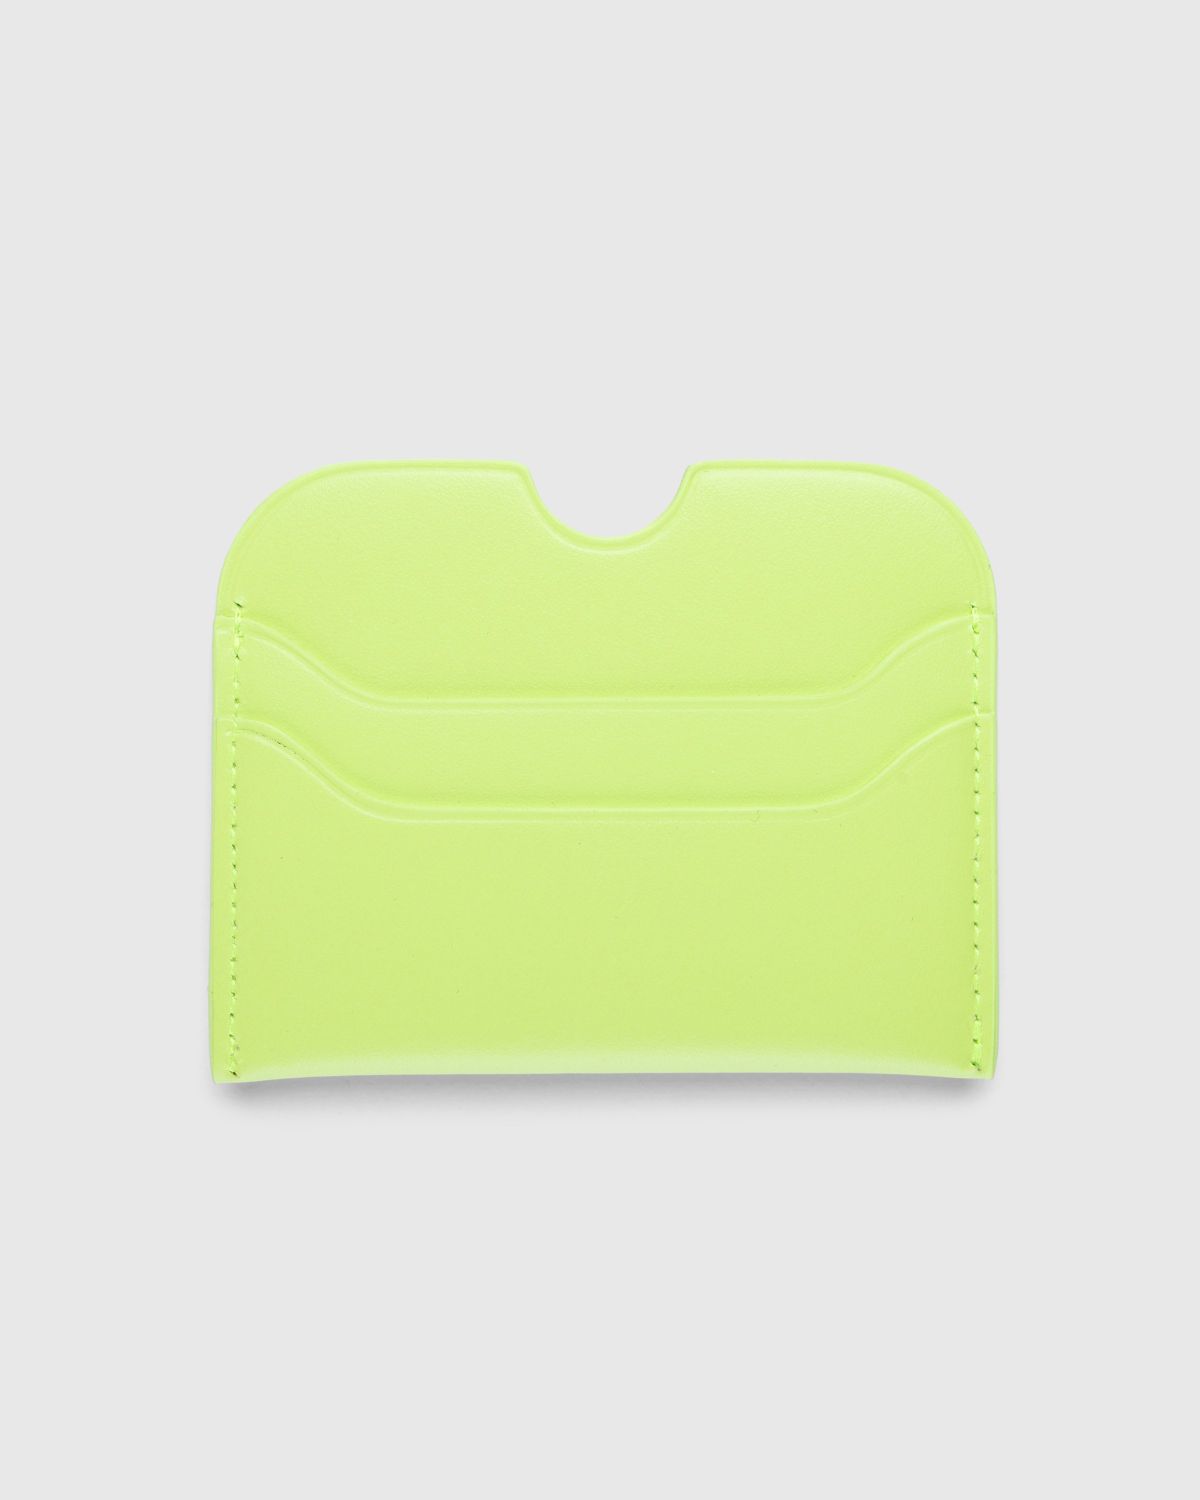 Acne Studios – Leather Card Holder Lime Green - Wallets - Green - Image 2